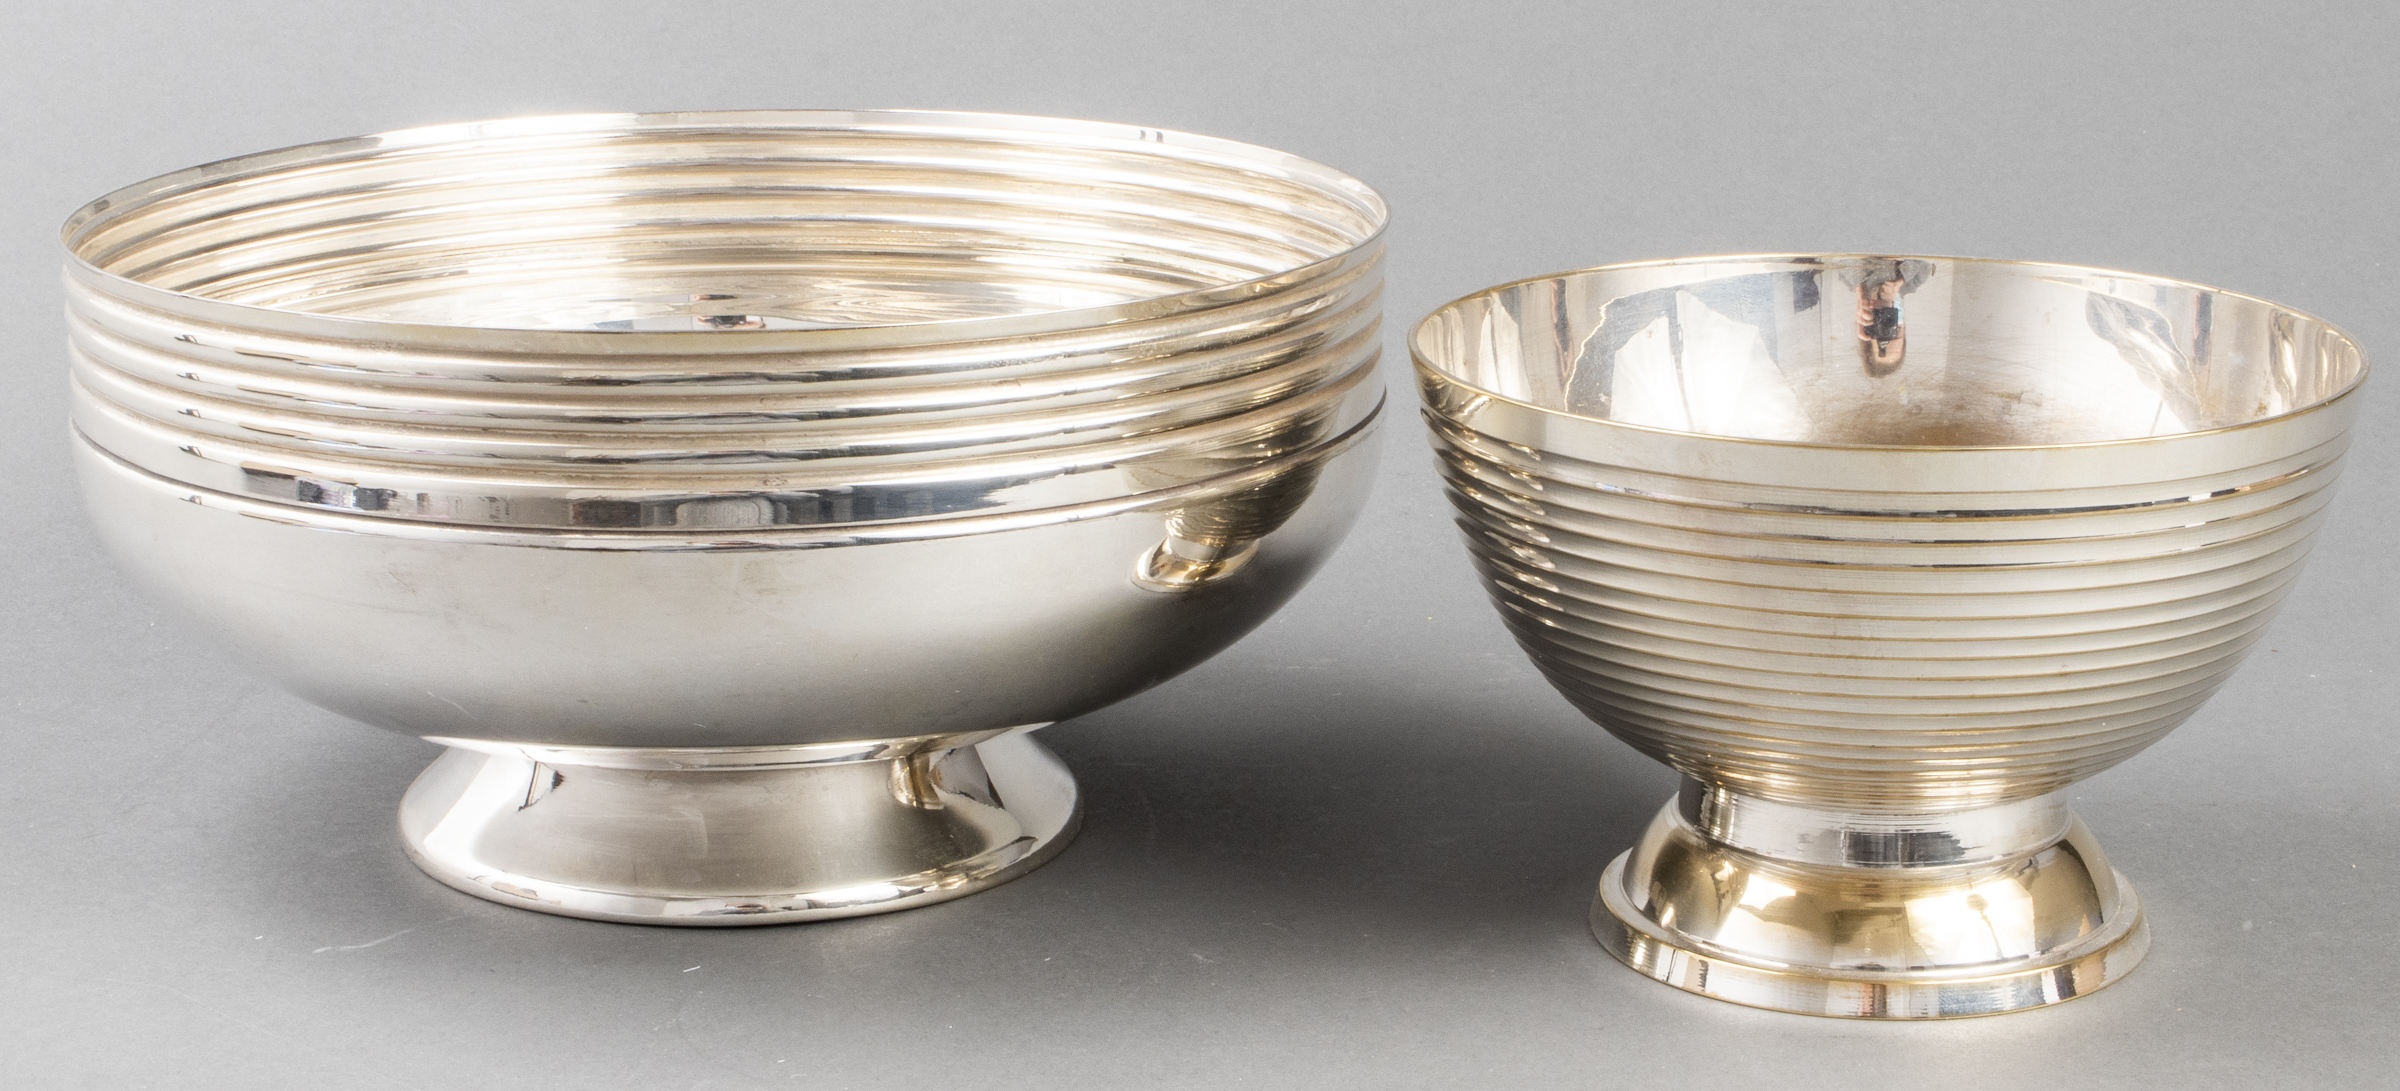 MODERN SILVERPLATE FOOTED BOWLS,